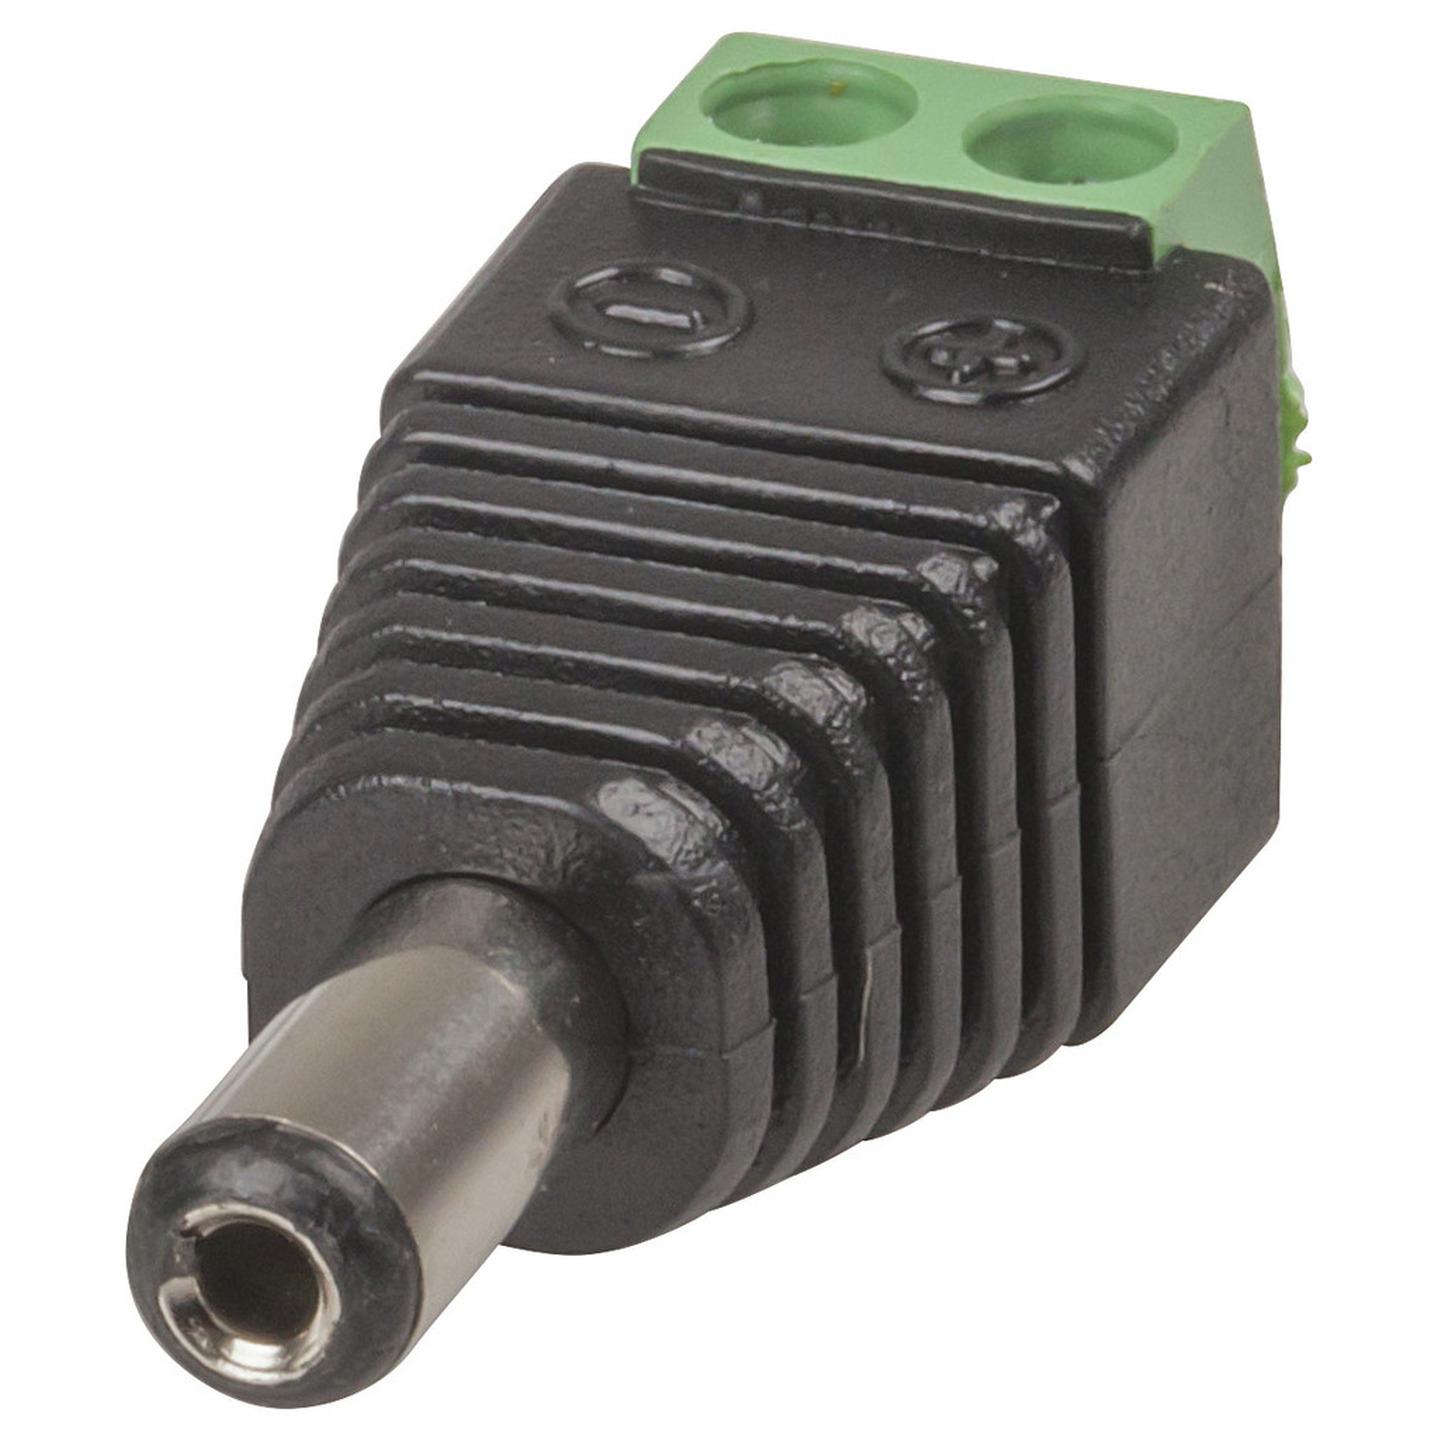 2.1mm DC Plug with Screw Terminals